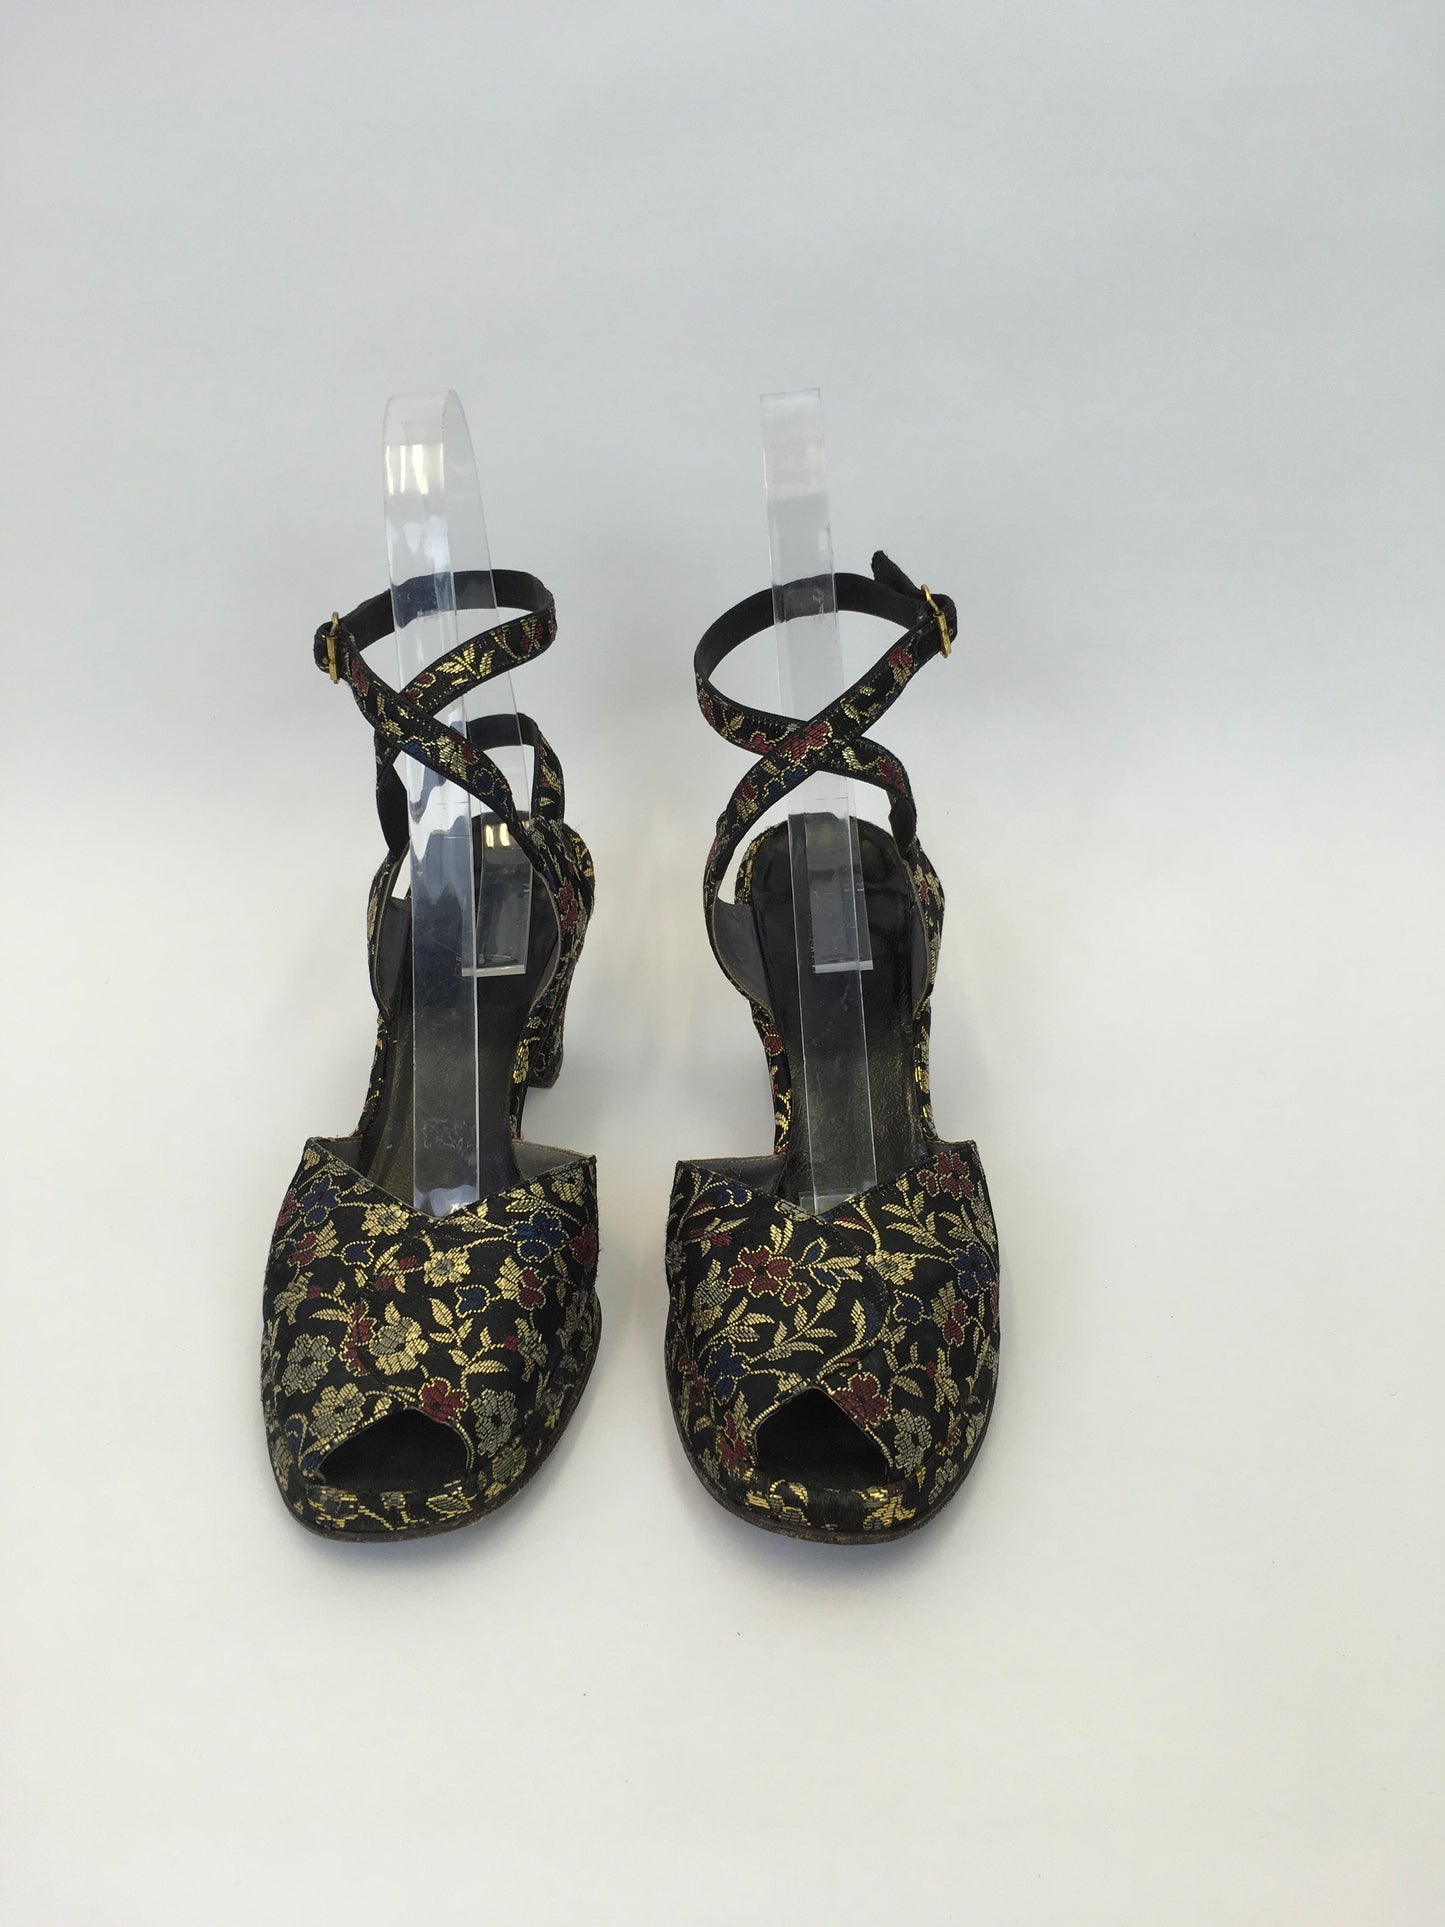 Original 1940s Heeled Sandals In A Beautiful Floral Brocade - Made by The Fabulous ‘ Colella’ American Label